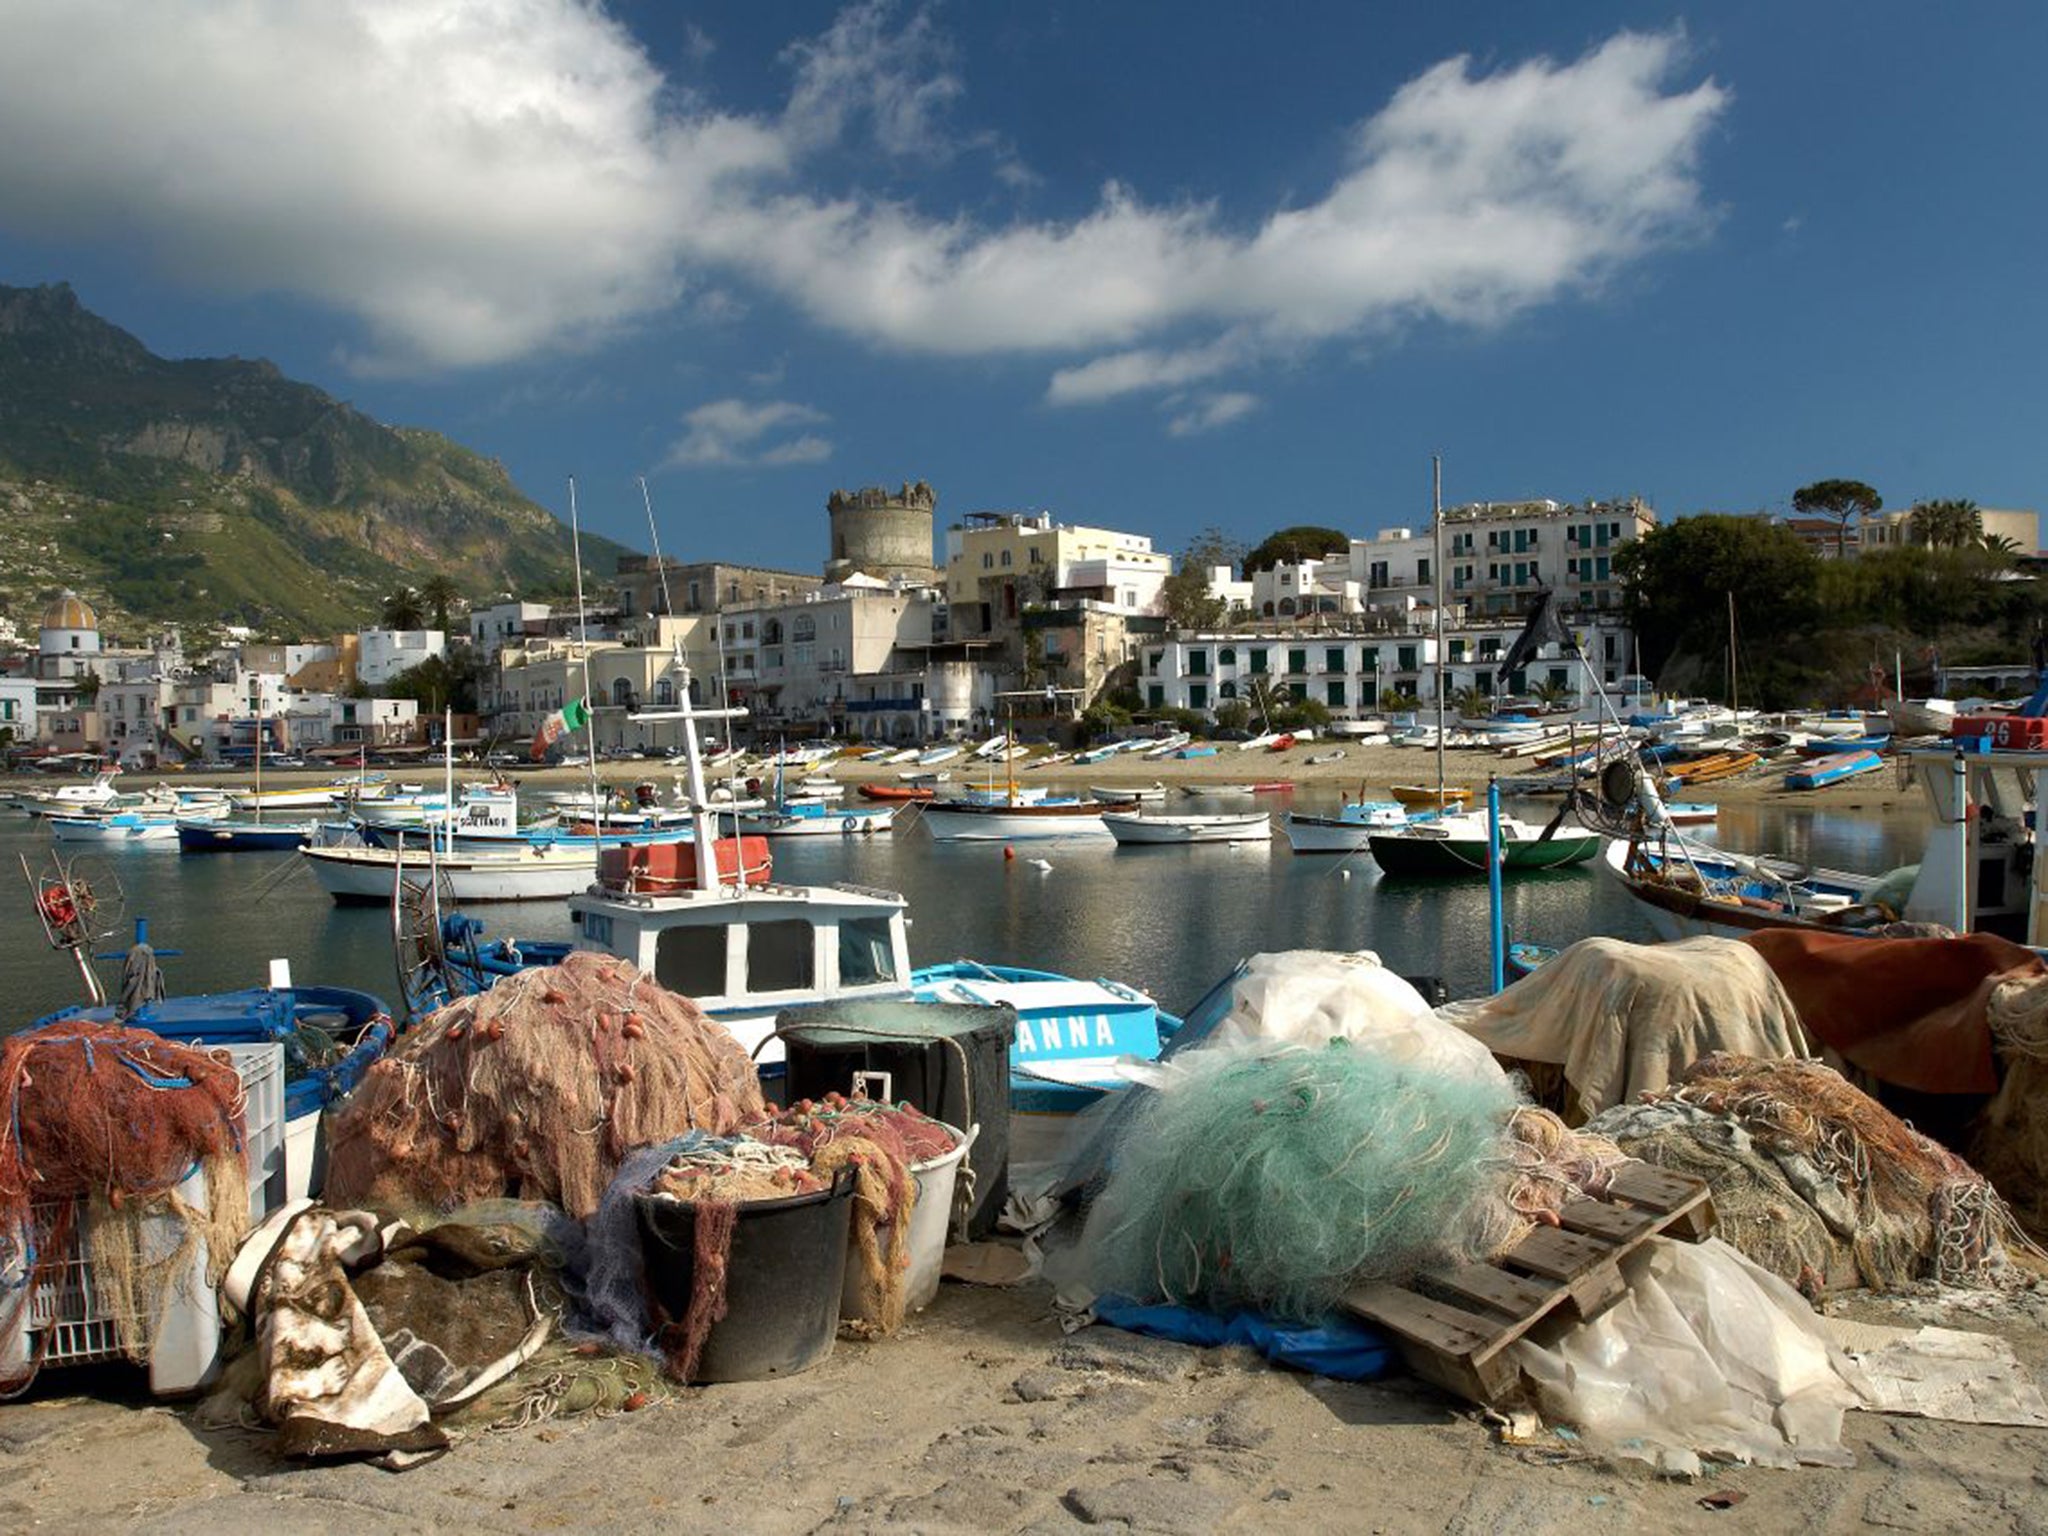 Forio harbour, Ischia, where fishermen are being trained as divers